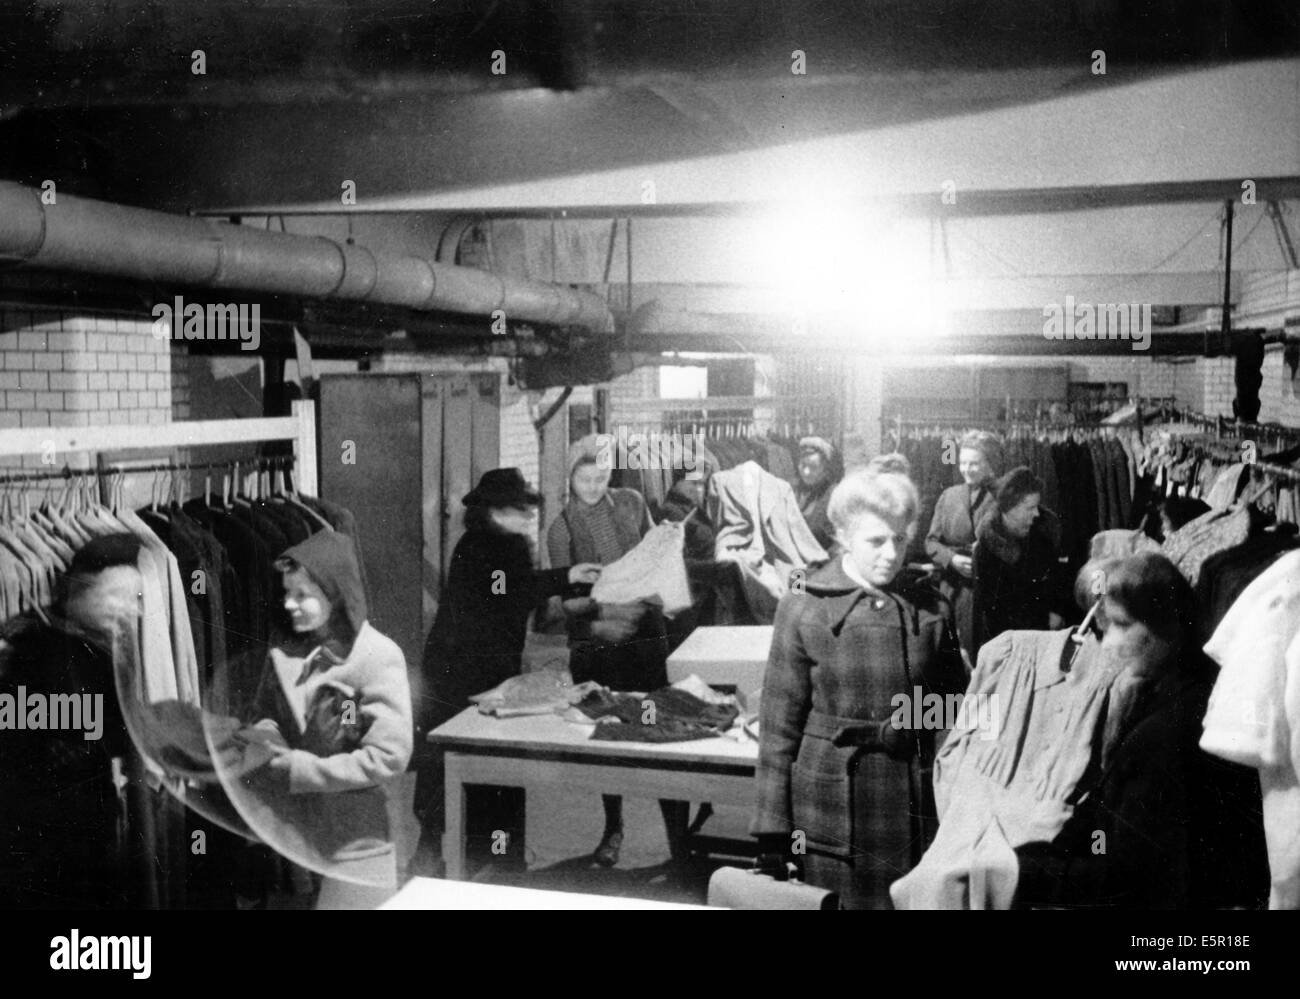 The picture from a Nazi news report shows women shopping for clothes in the basement of a boutique after an air raid in Berlin, Germany, October 1944. The original text on the back of the picture reads: 'Life in Berlin today. A big Berlin fashion boutique continues with its basement shopping. Just like this store, many others are operating in basements or other parts of their stores that have escaped damage during the bombing terror.' Fotoarchiv für Zeitgeschichte - NO WIRE SERVICE Stock Photo